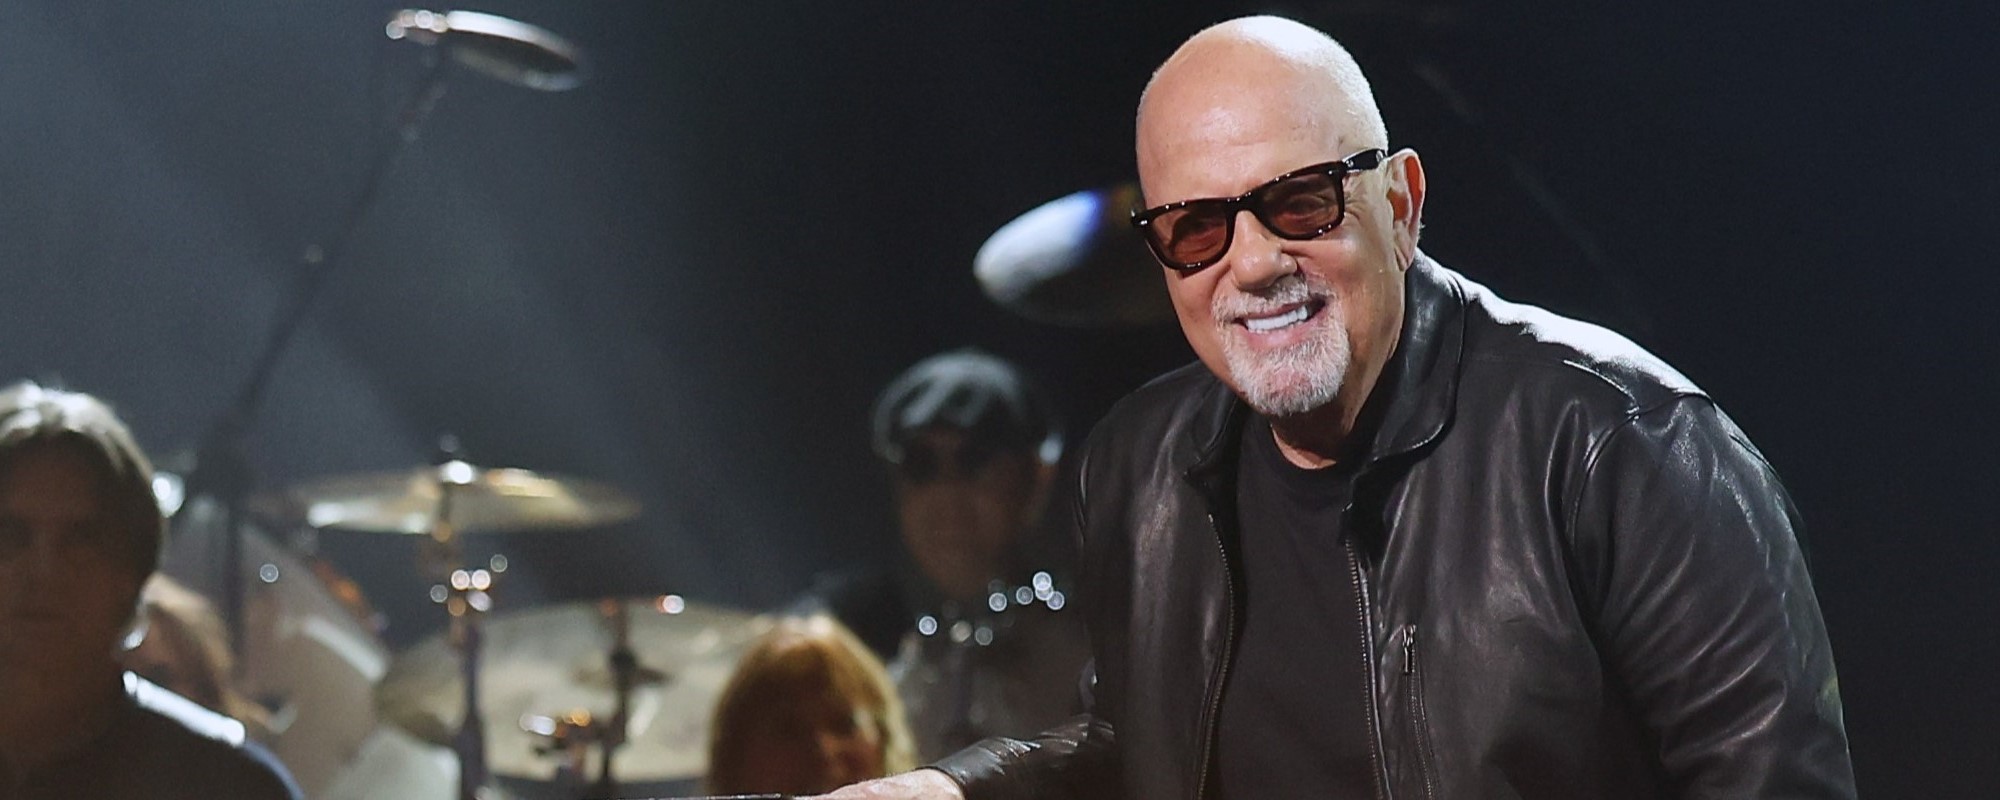 5 Superb Billy Joel Guest Appearances in Honor of the Piano Man’s 75th Birthday